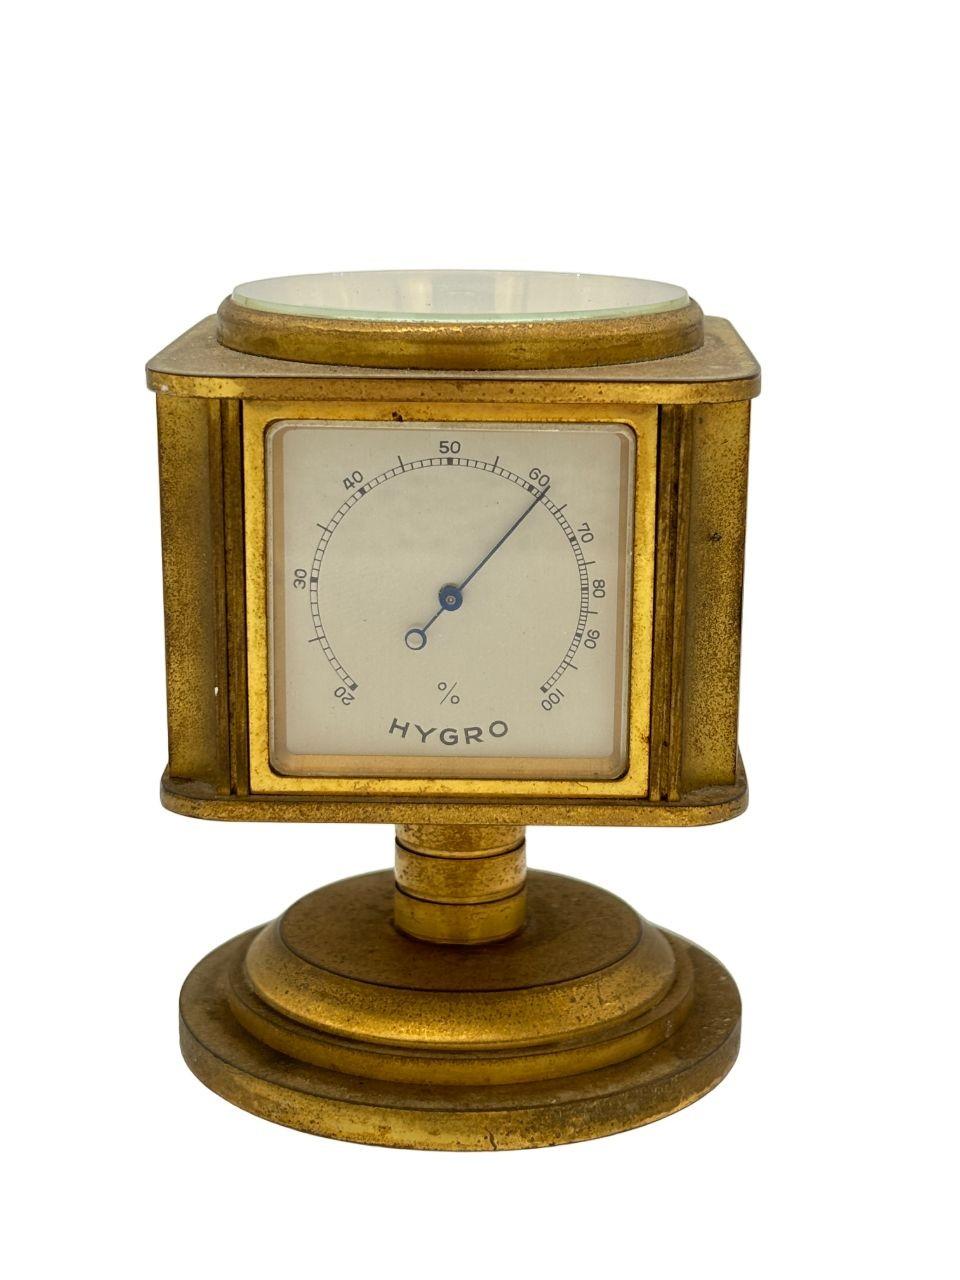 North American Vintage Rotating Desk Clock with Weather Instruments For Sale